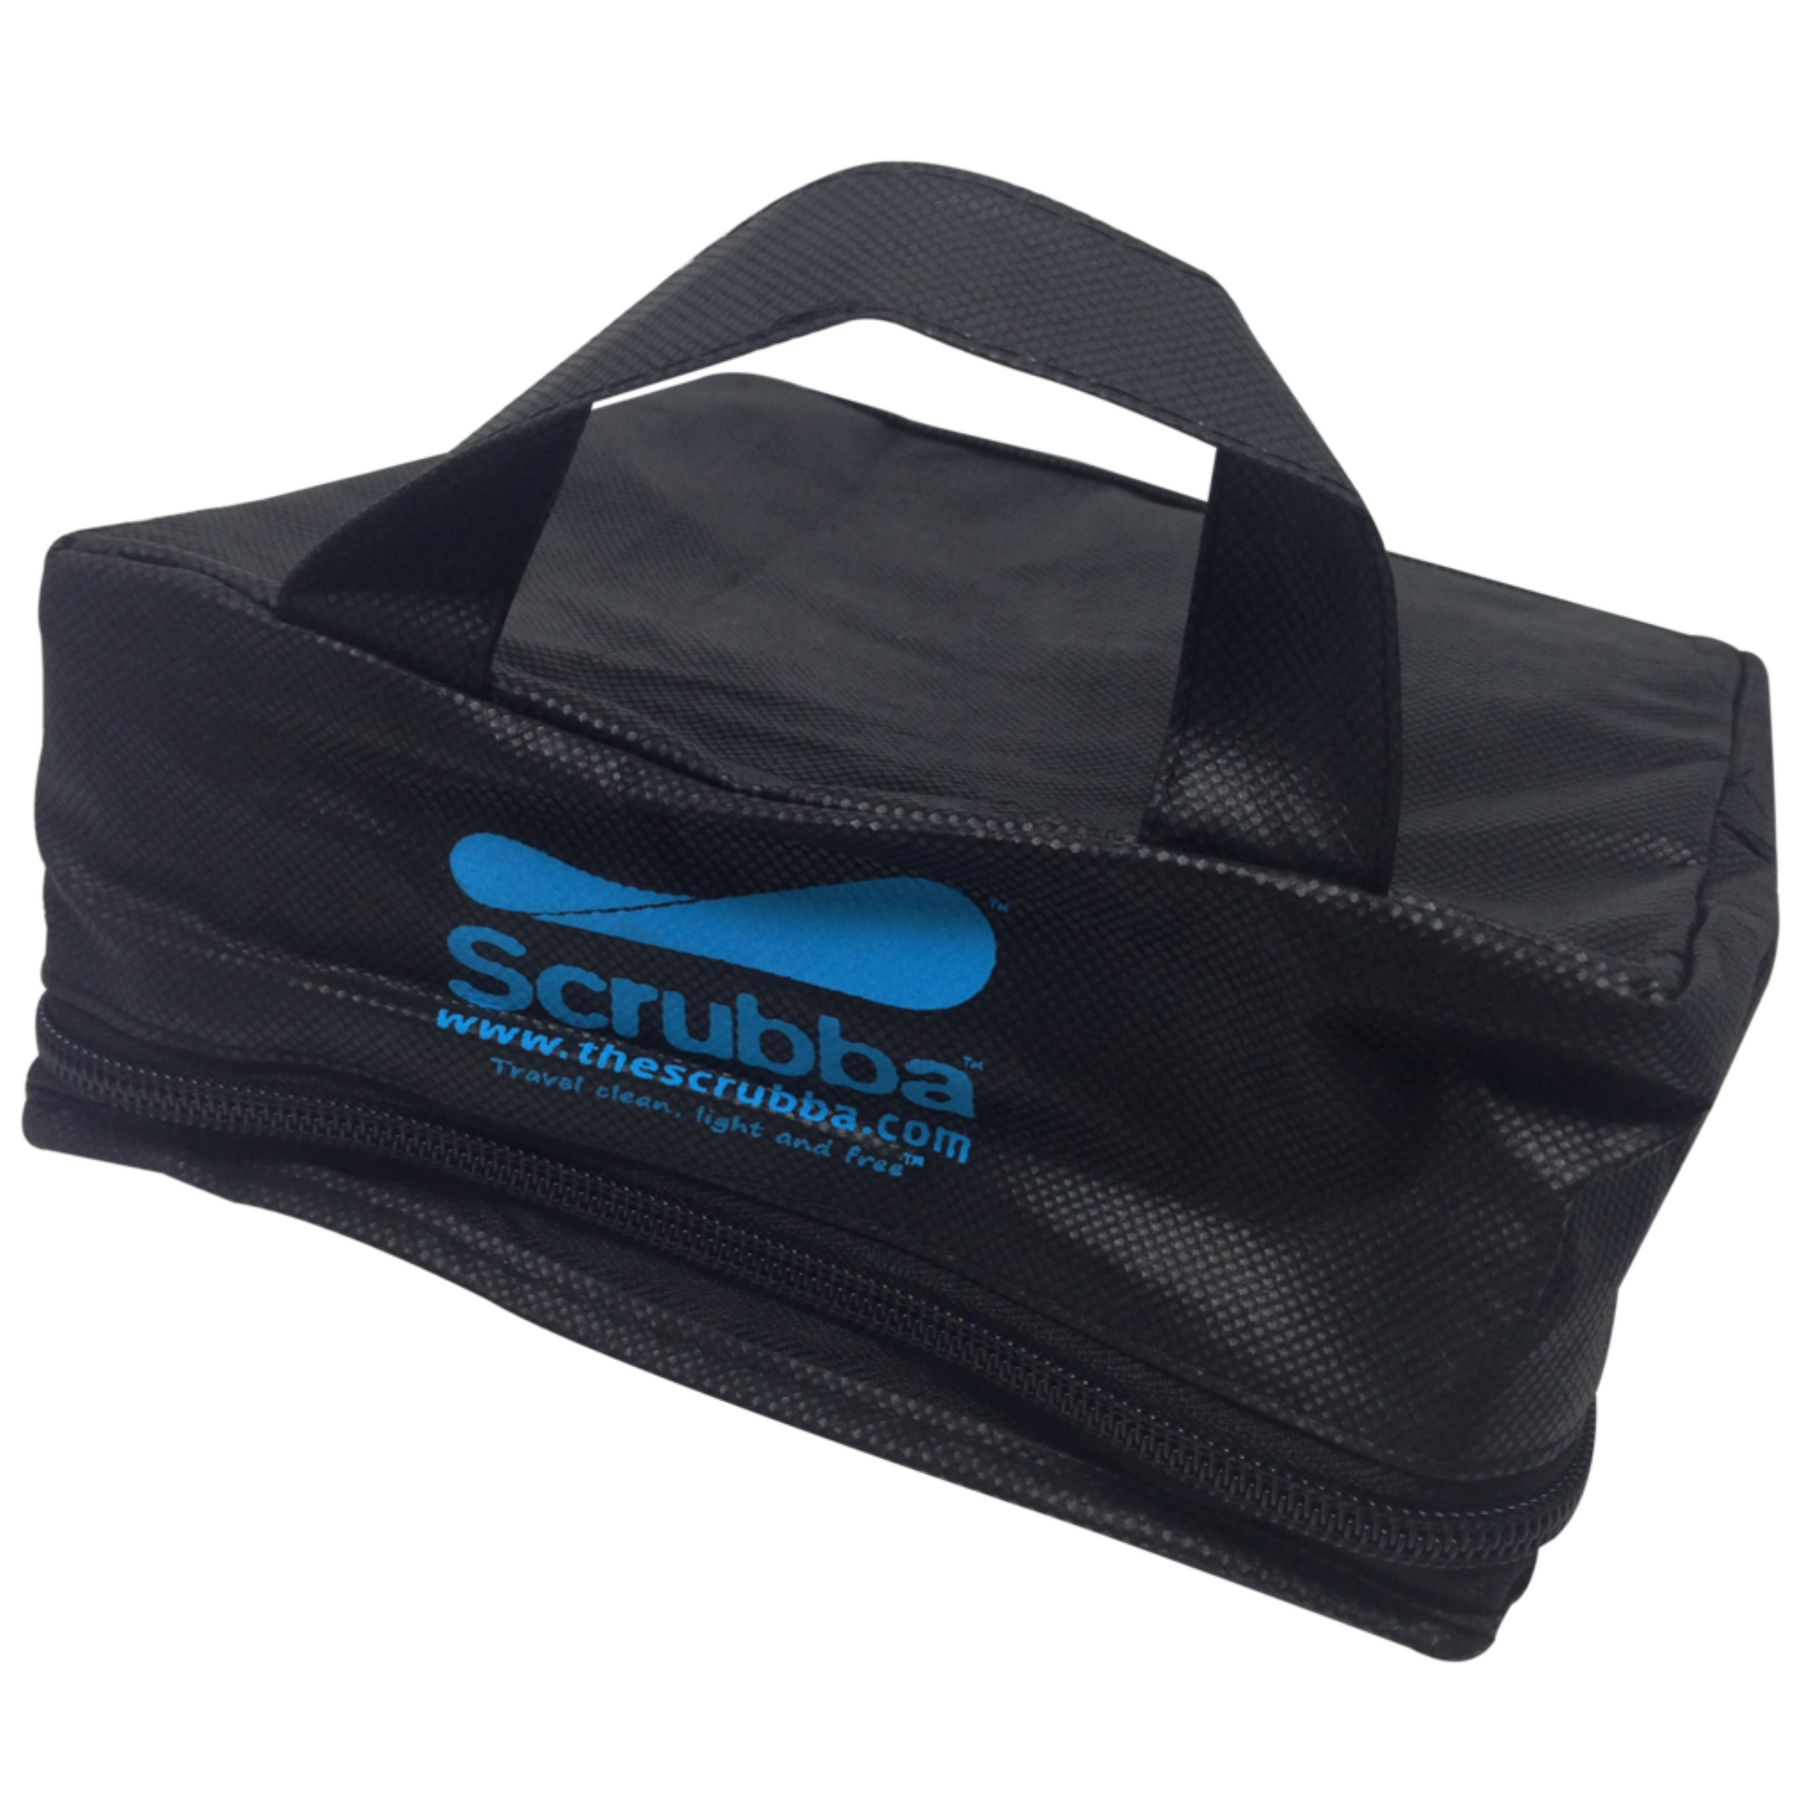 The Scrubba™ Wash Bag — Packing and Travel -- Better Living Through Design